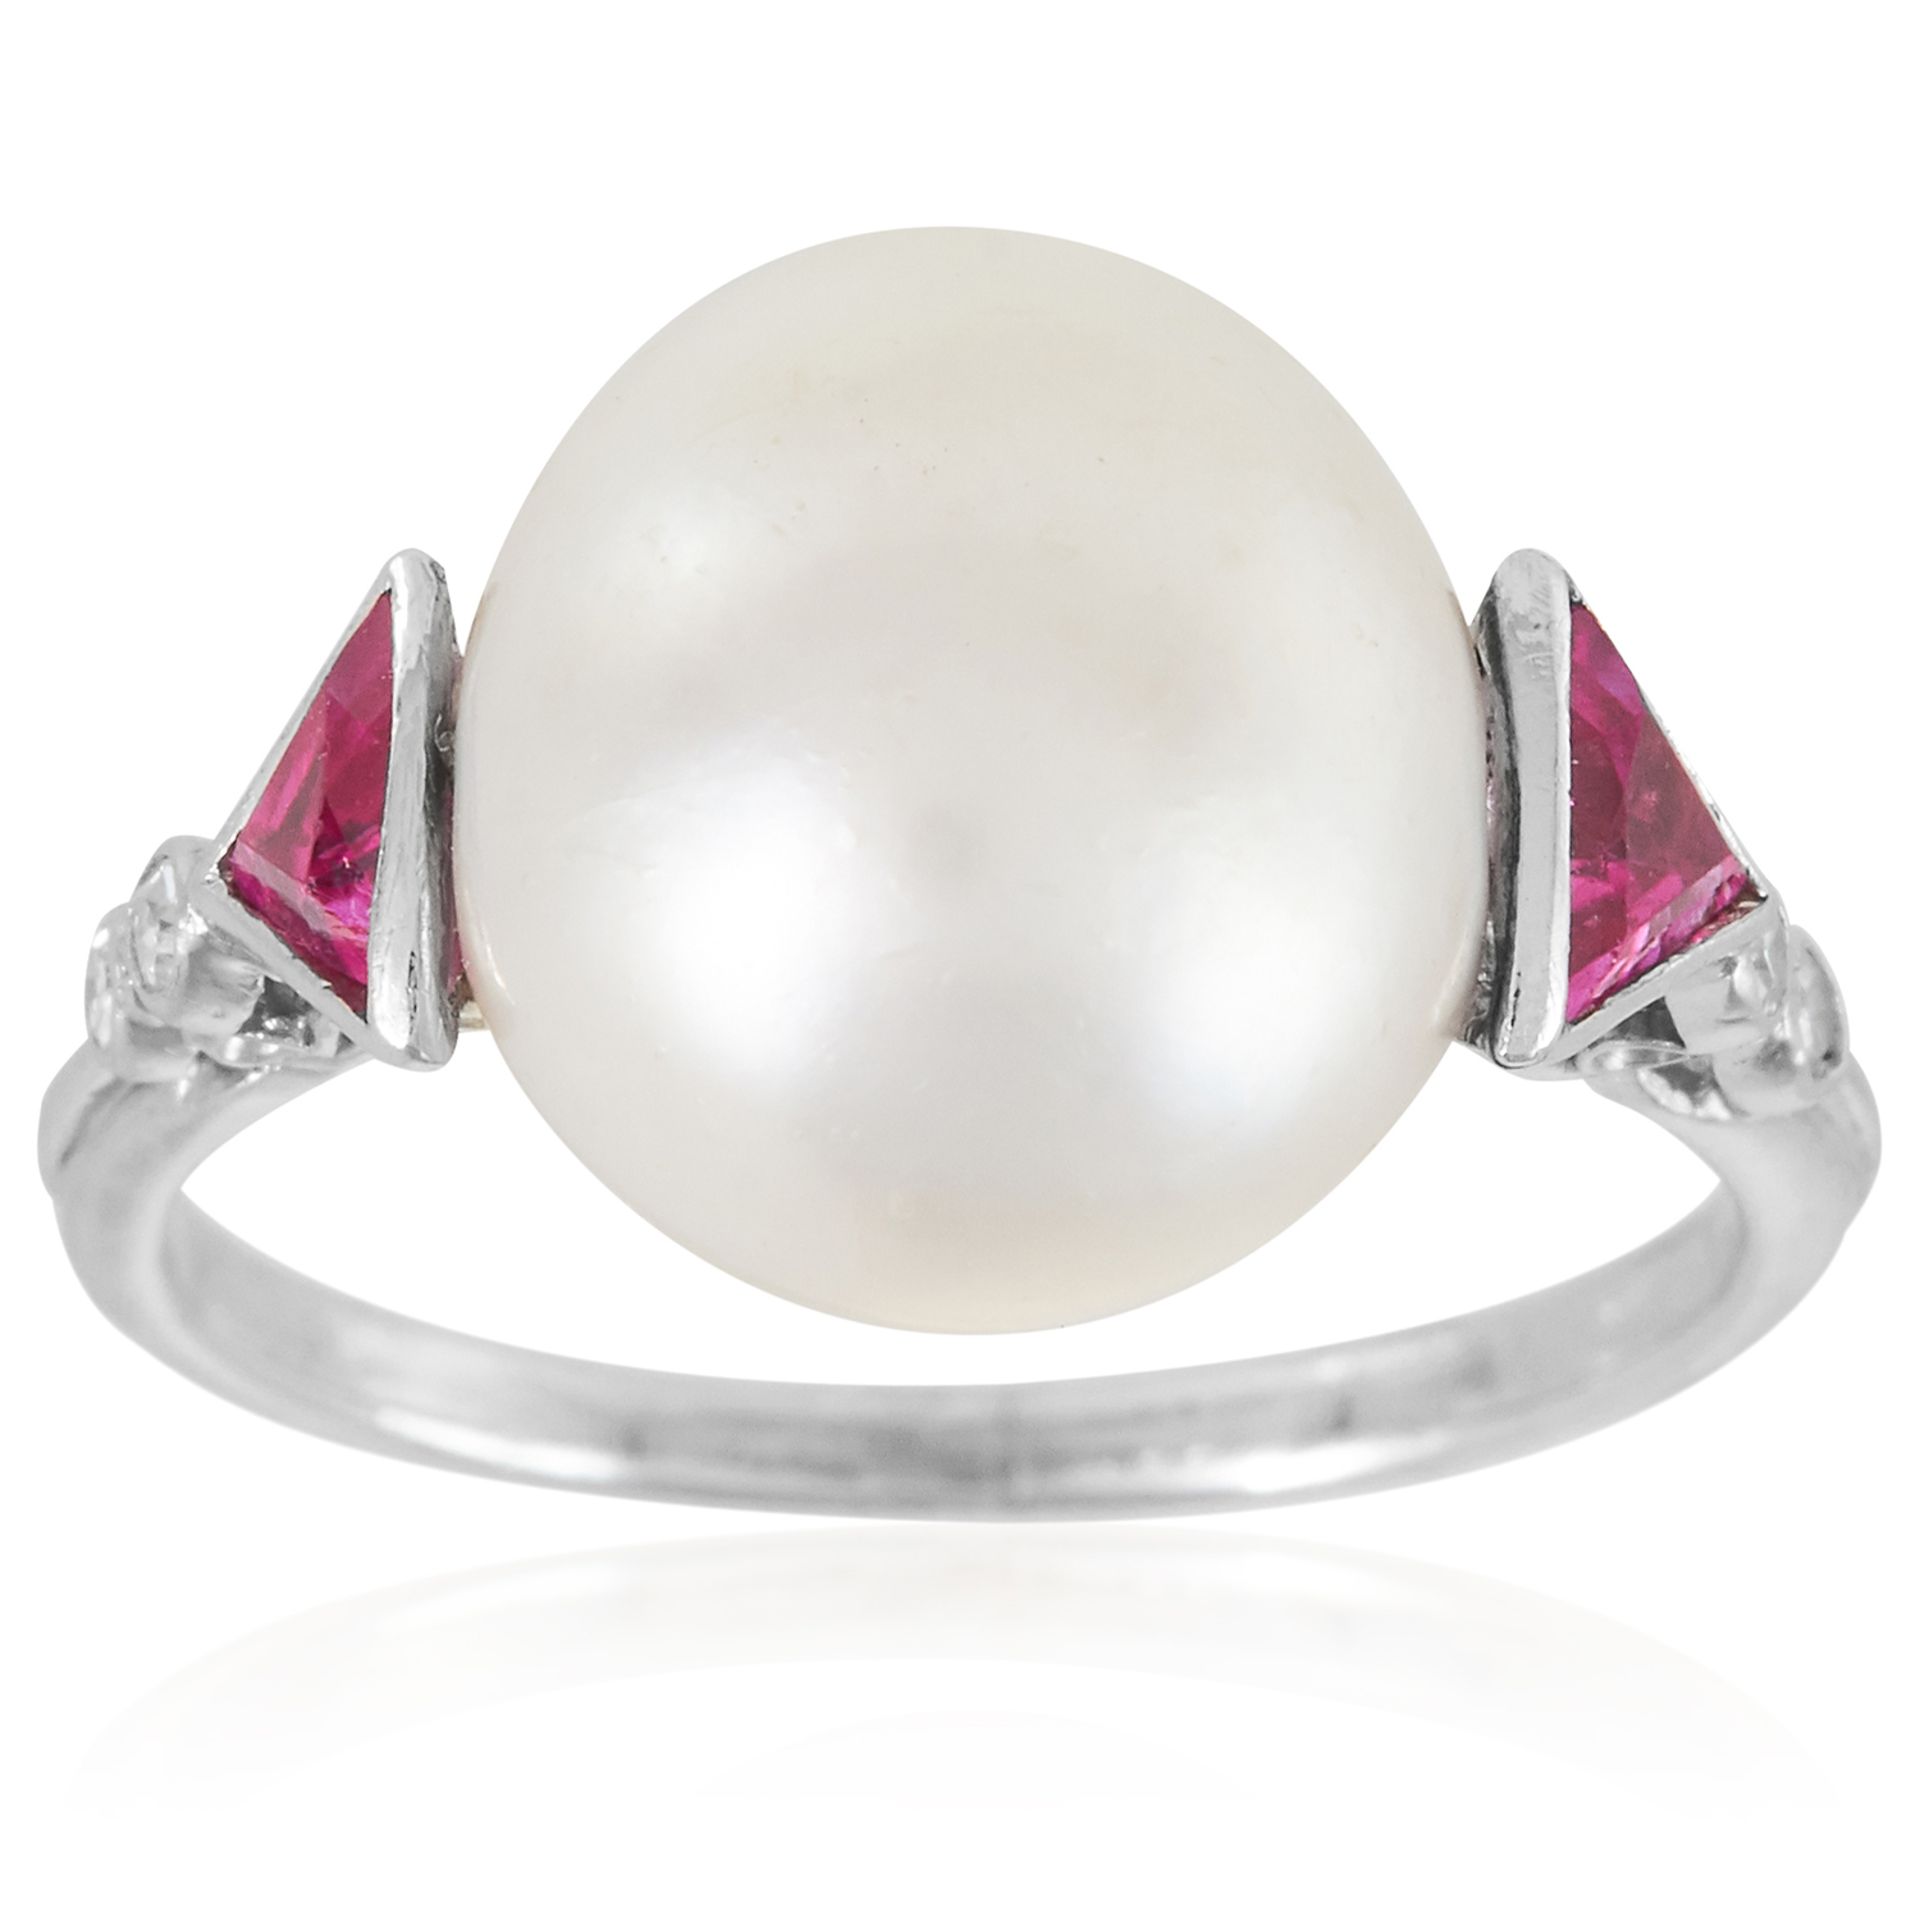 AN ANTIQUE NATURAL PEARL, RUBY AND DIAMOND DRESS RING in white gold or platinum, set with a